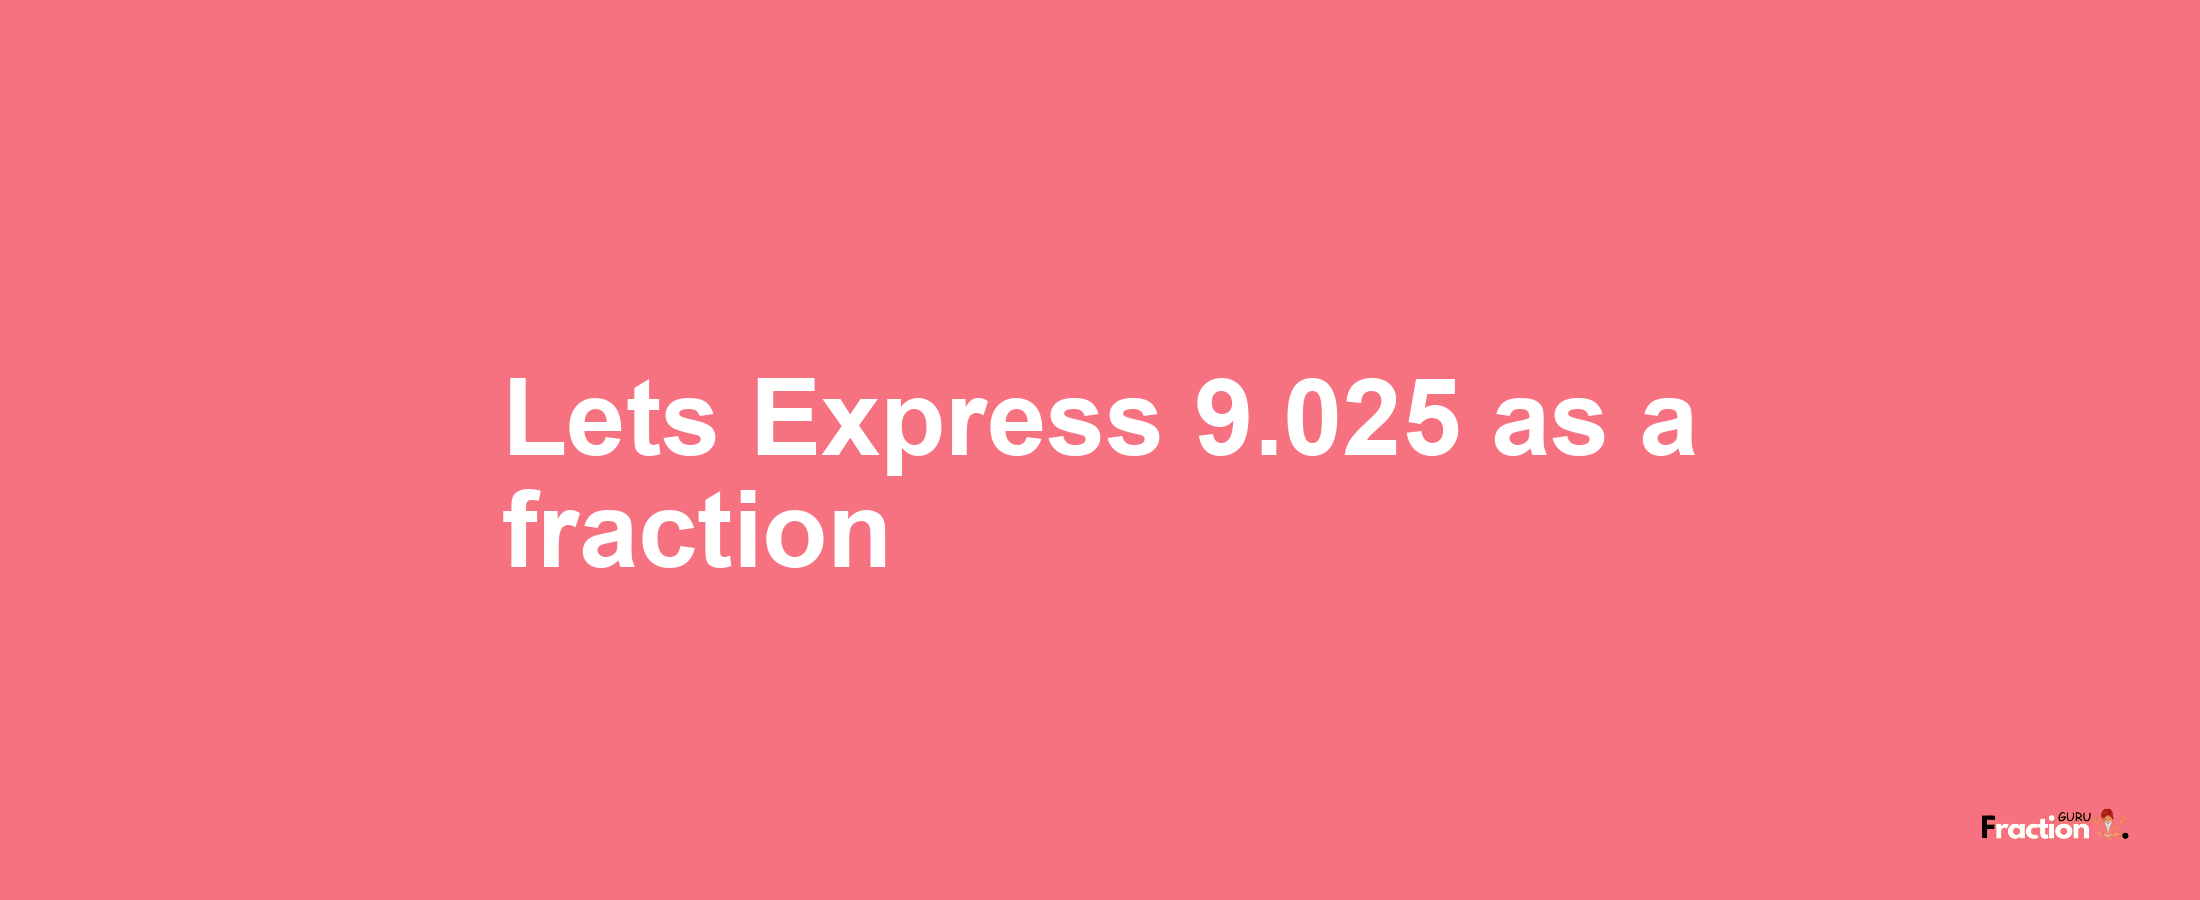 Lets Express 9.025 as afraction